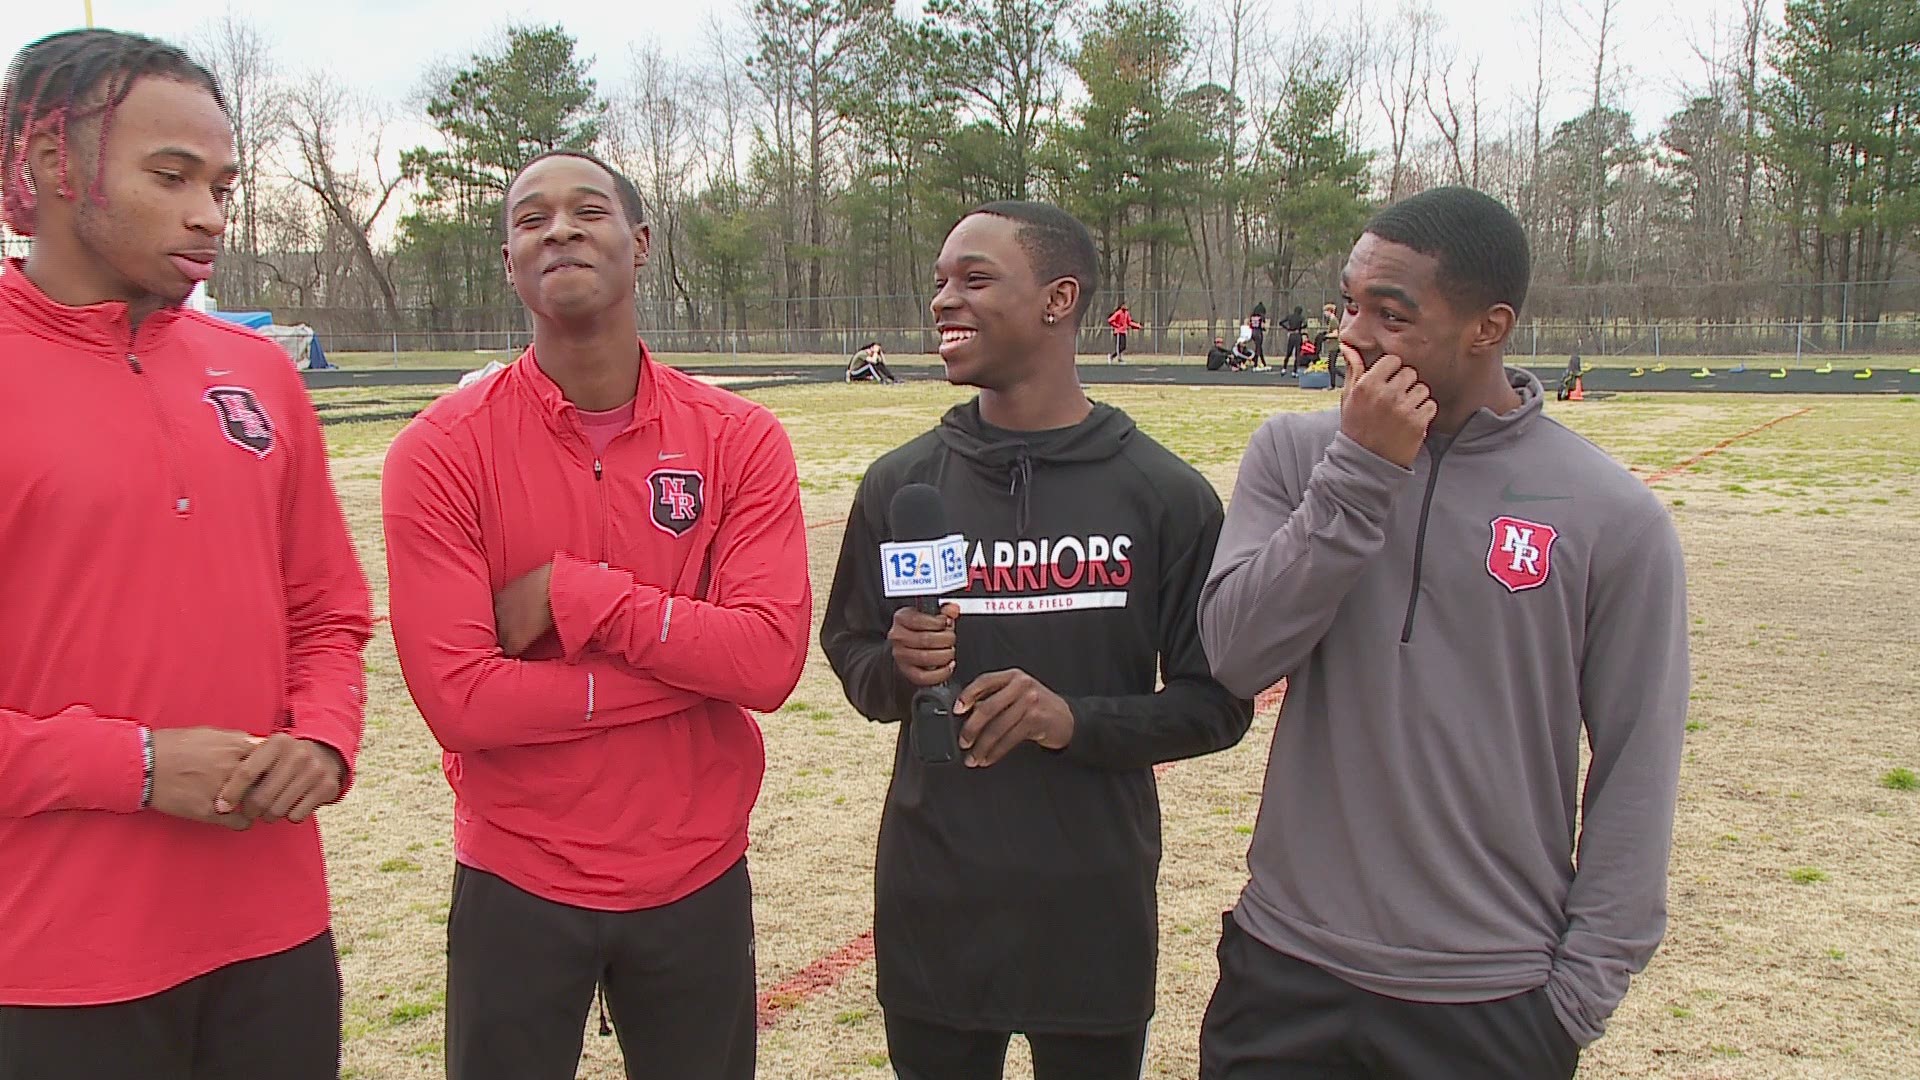 Fresh off a win at nationals, the Warriors 4x200 m boys relay team is as good as it gets.